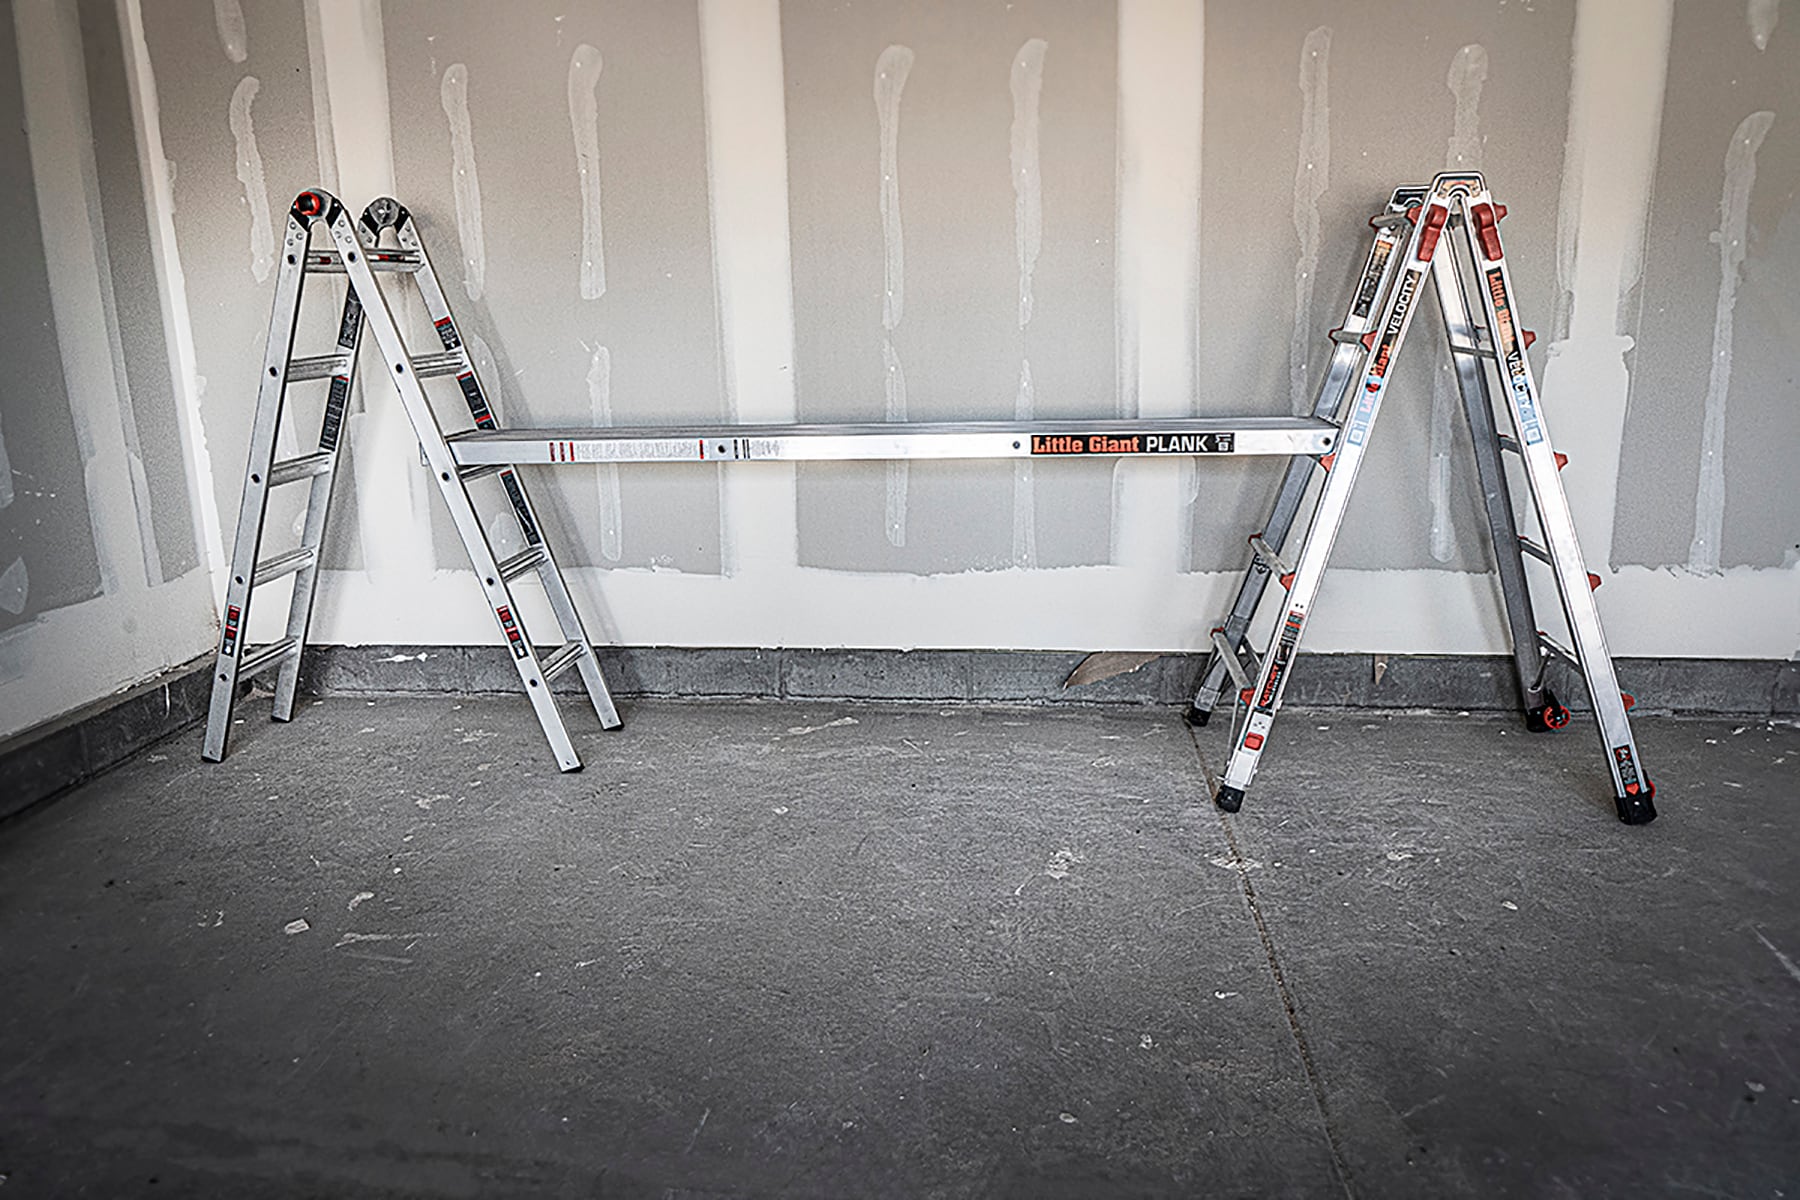 Little Giant Ladders Aluminum 11-in Platform For Ladders and Scaffolding